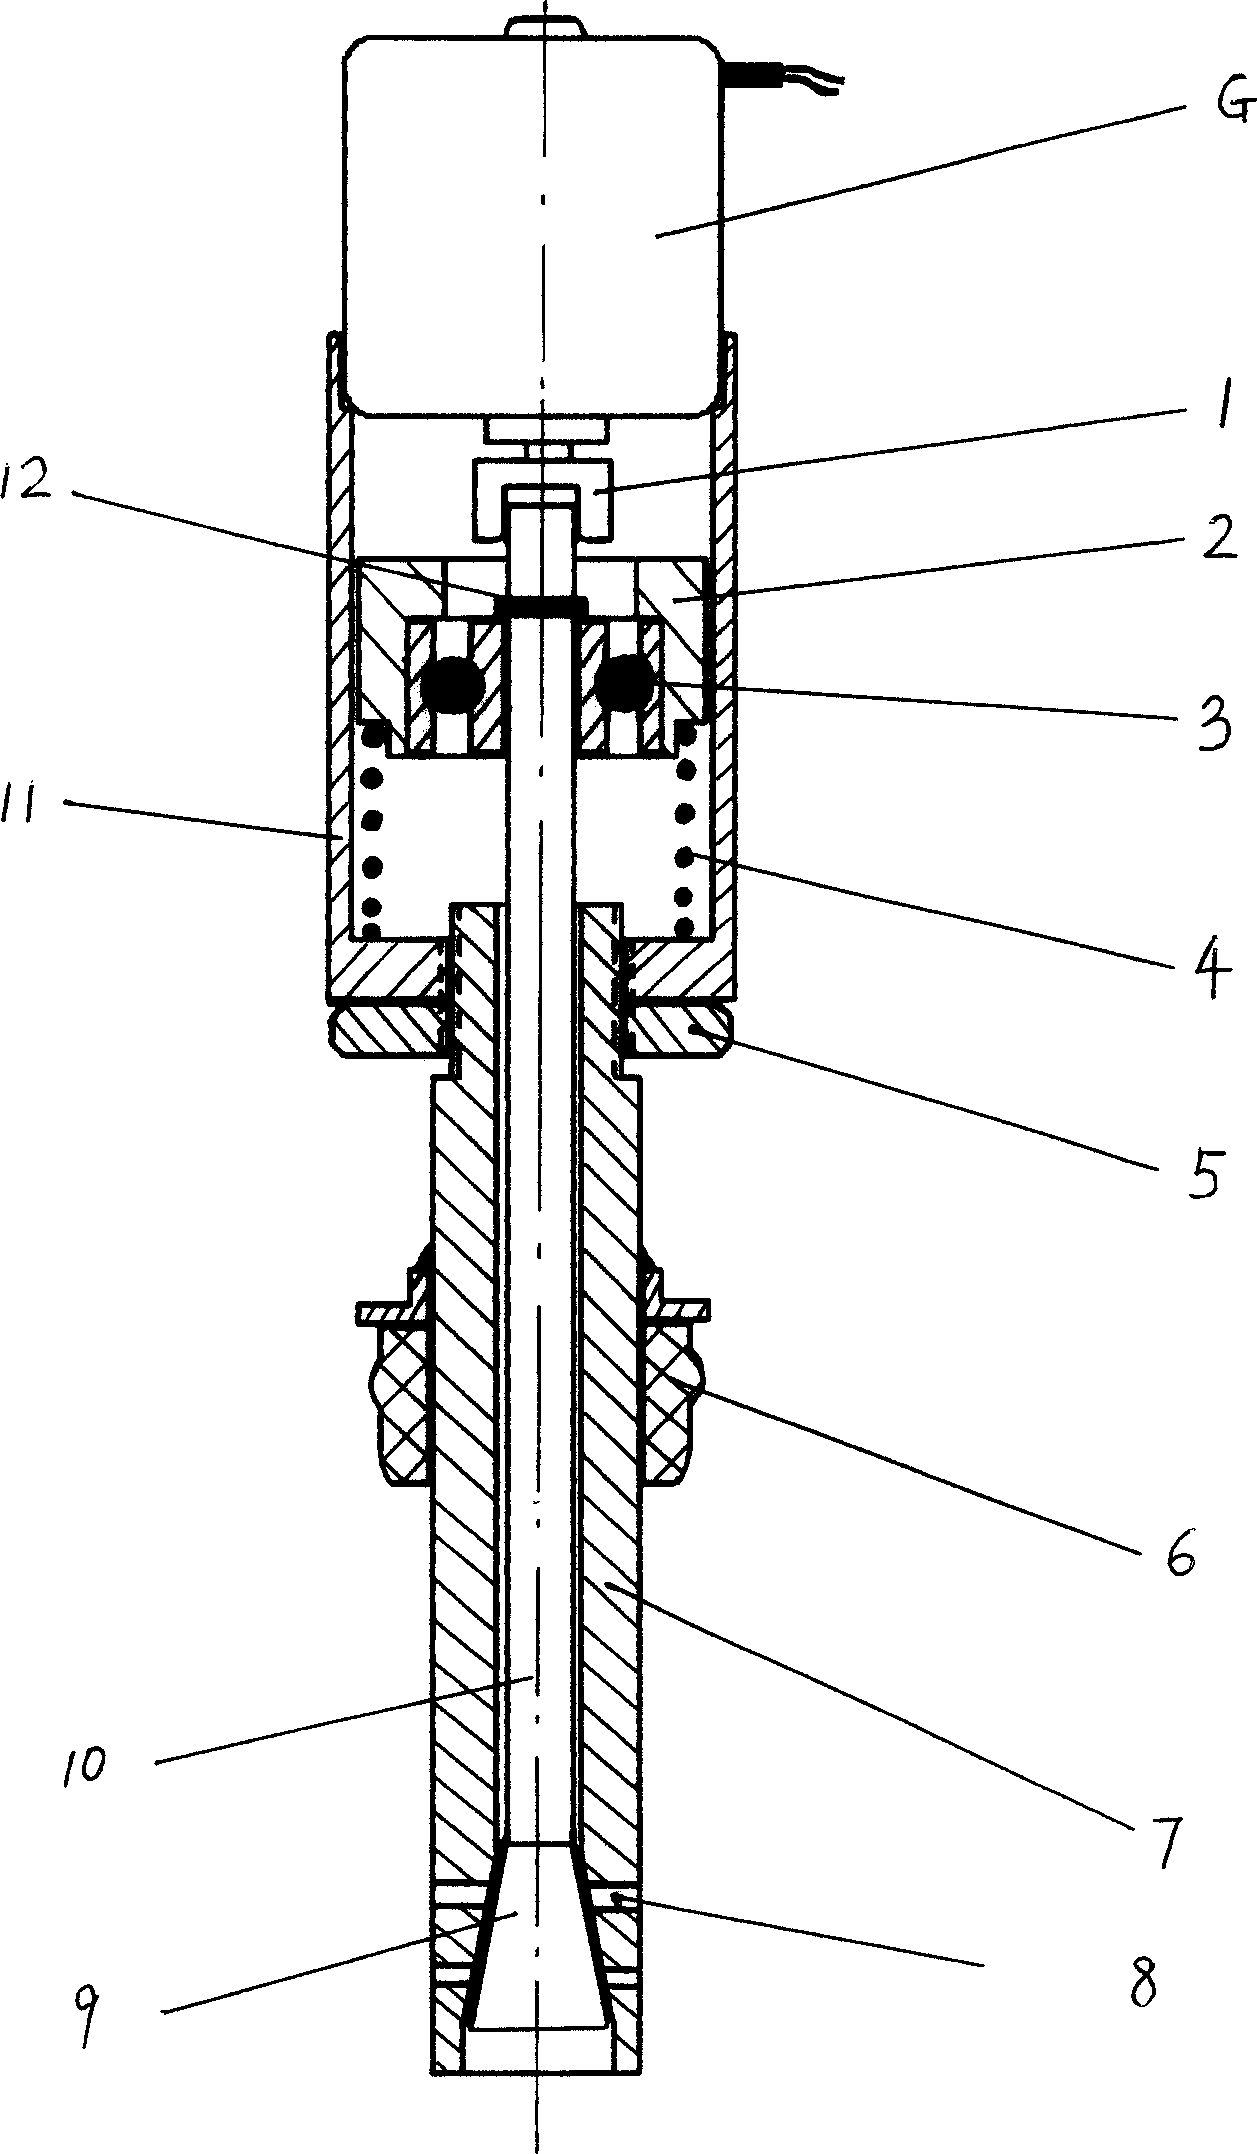 Engine oil lifetime monitoring apparatus for internal combustion engine